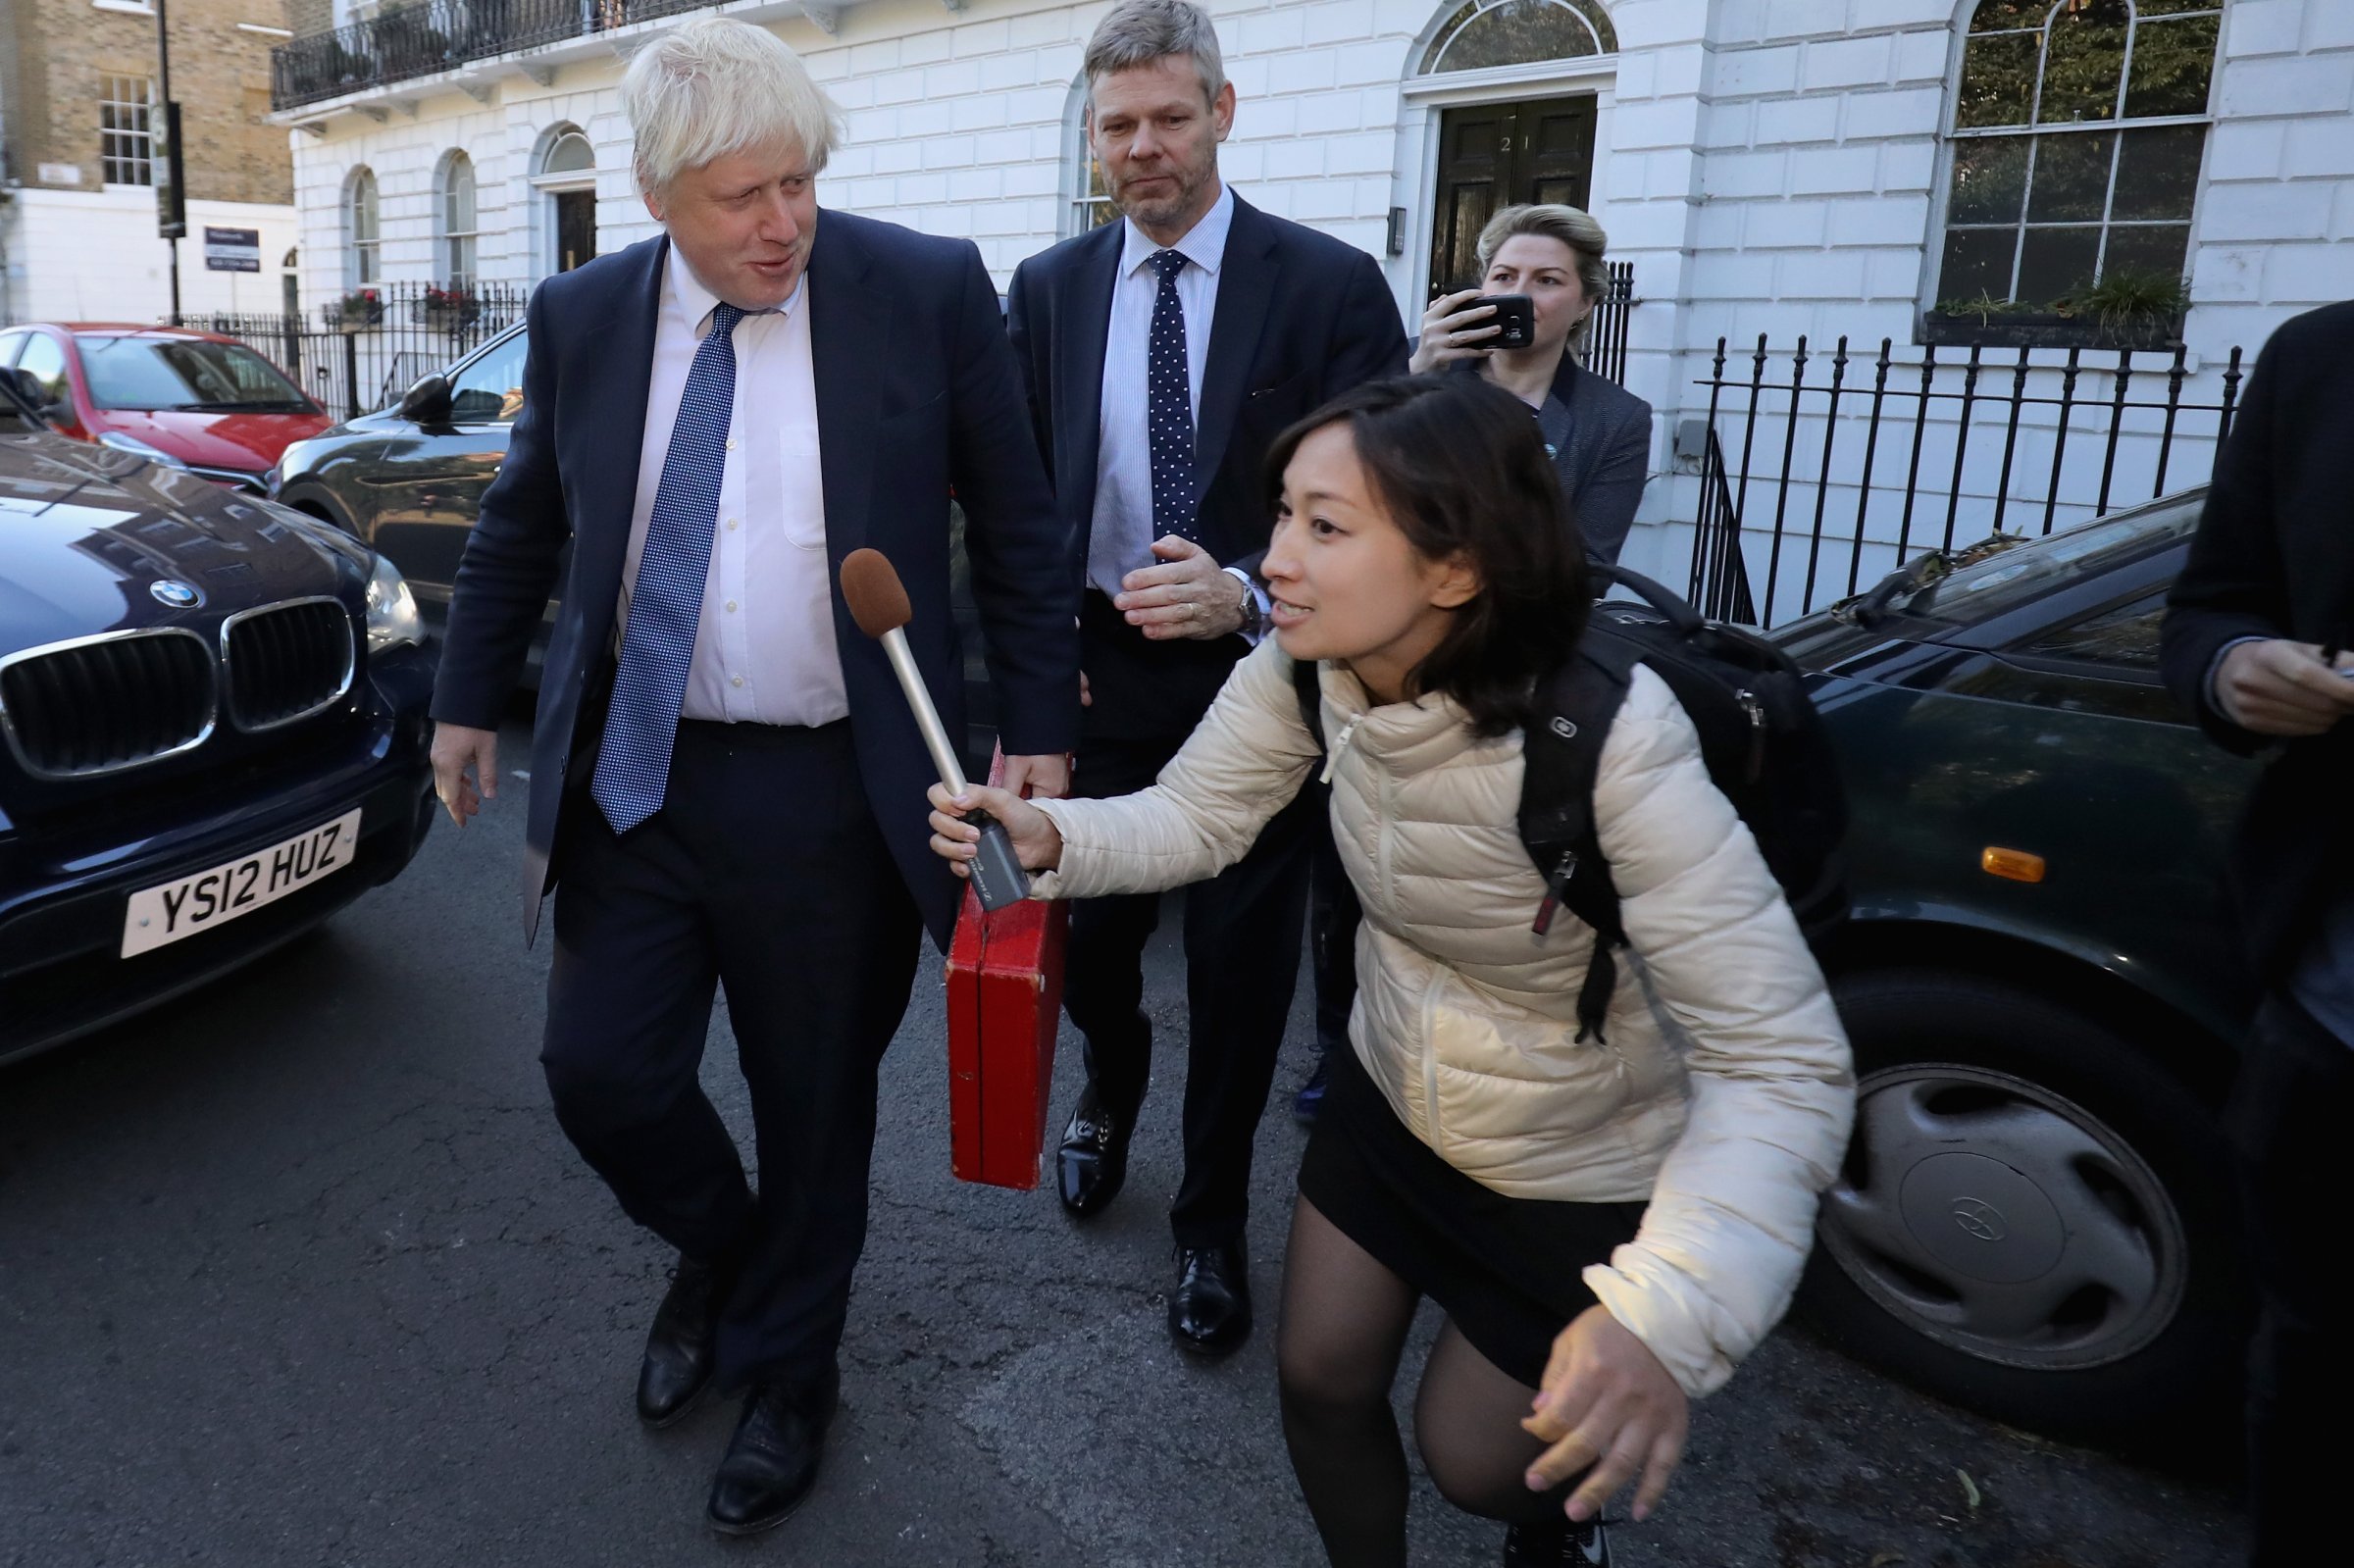 British Foreign Secretary Boris Johnson leaves his home on his first day as one of Prime Minister Theresa May's cabinet on July 14, 2016 in London, England.